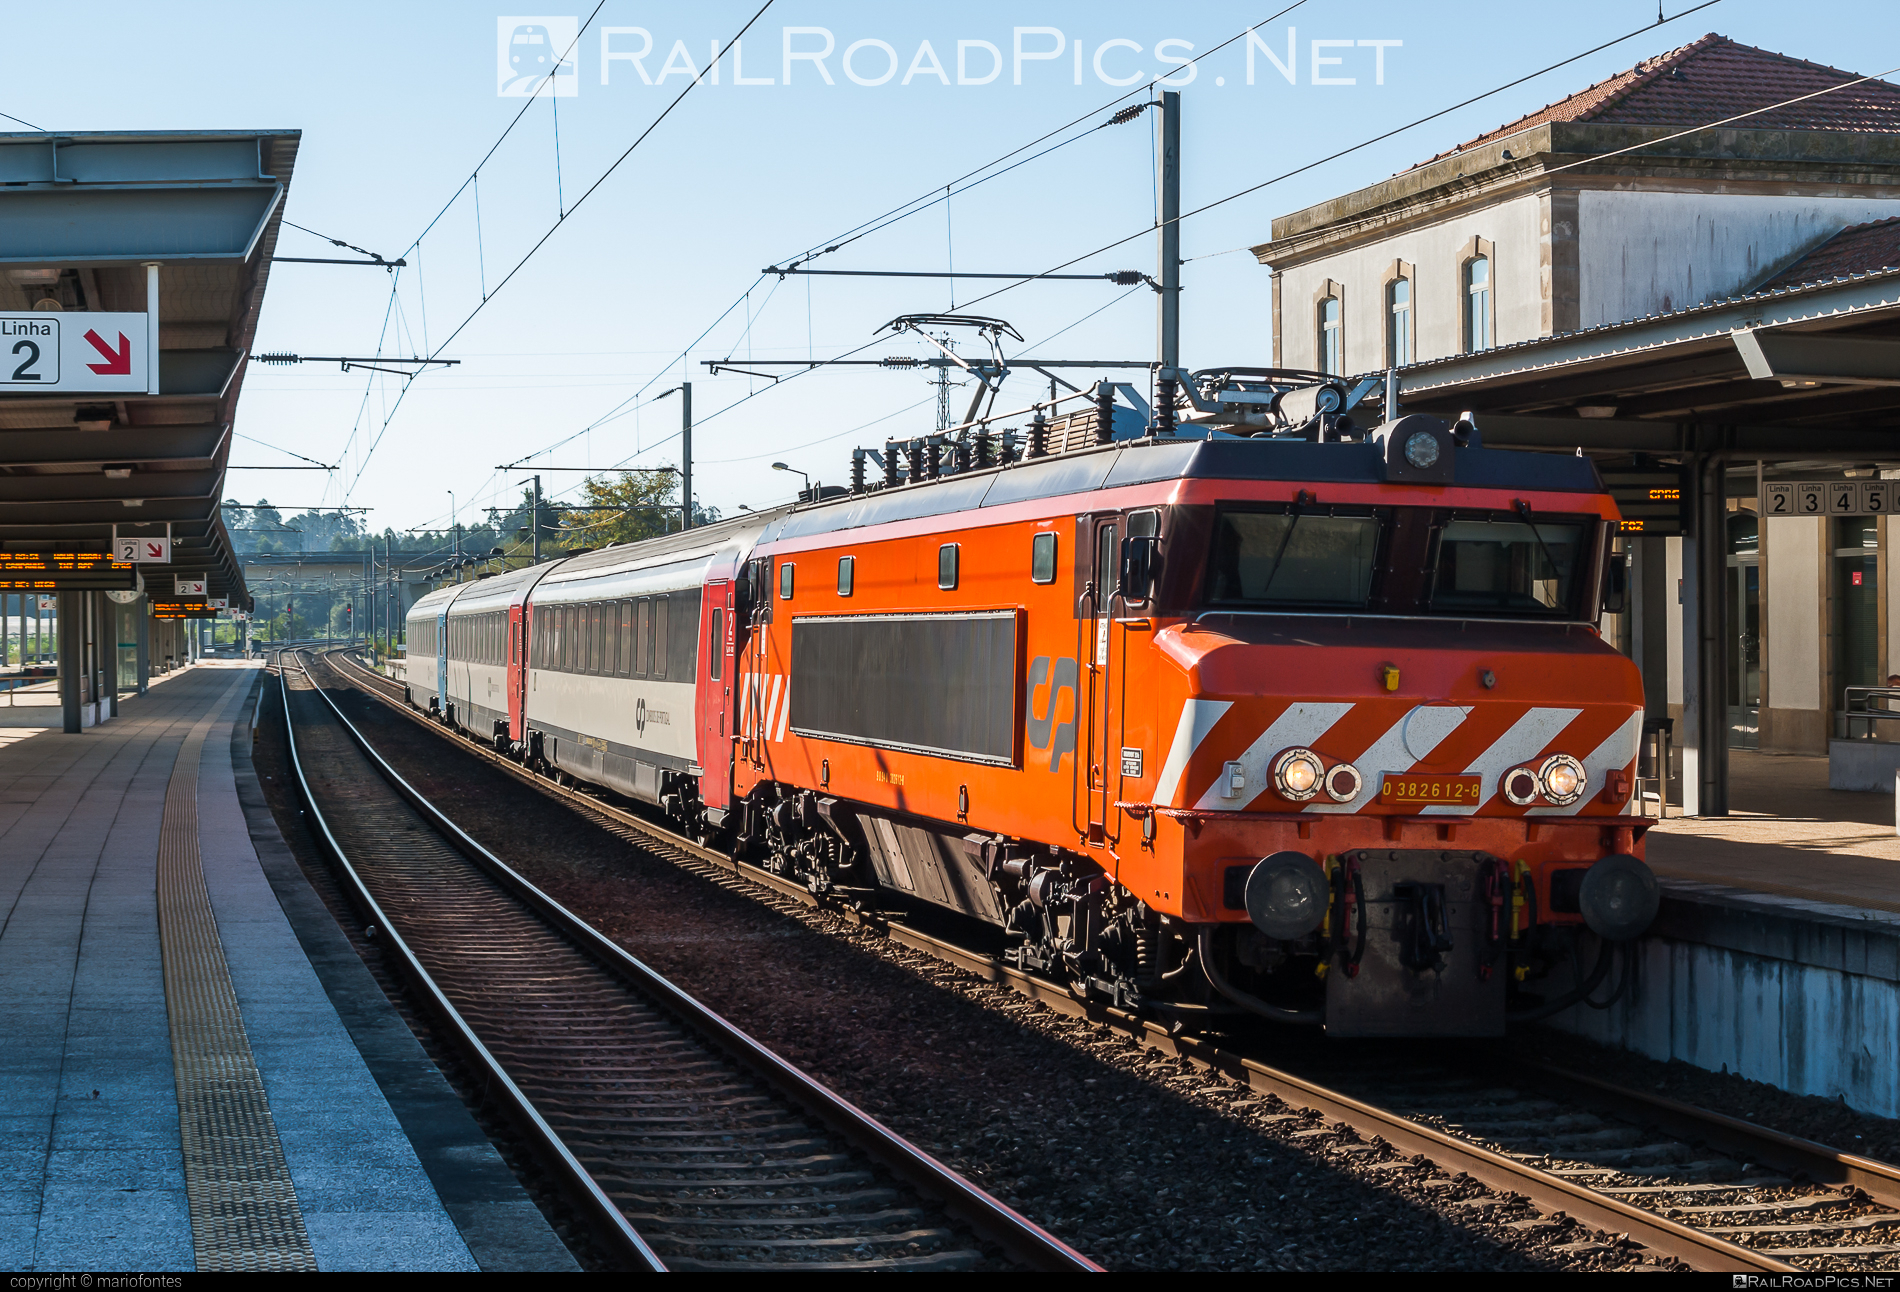 CP Class 2600 - 2612 operated by CP - Comboios de Portugal, E.P.E. #comboiosDePortugal #comboiosDePortugalEPE #cpClass2600 #nezCassee #sncfBB15000